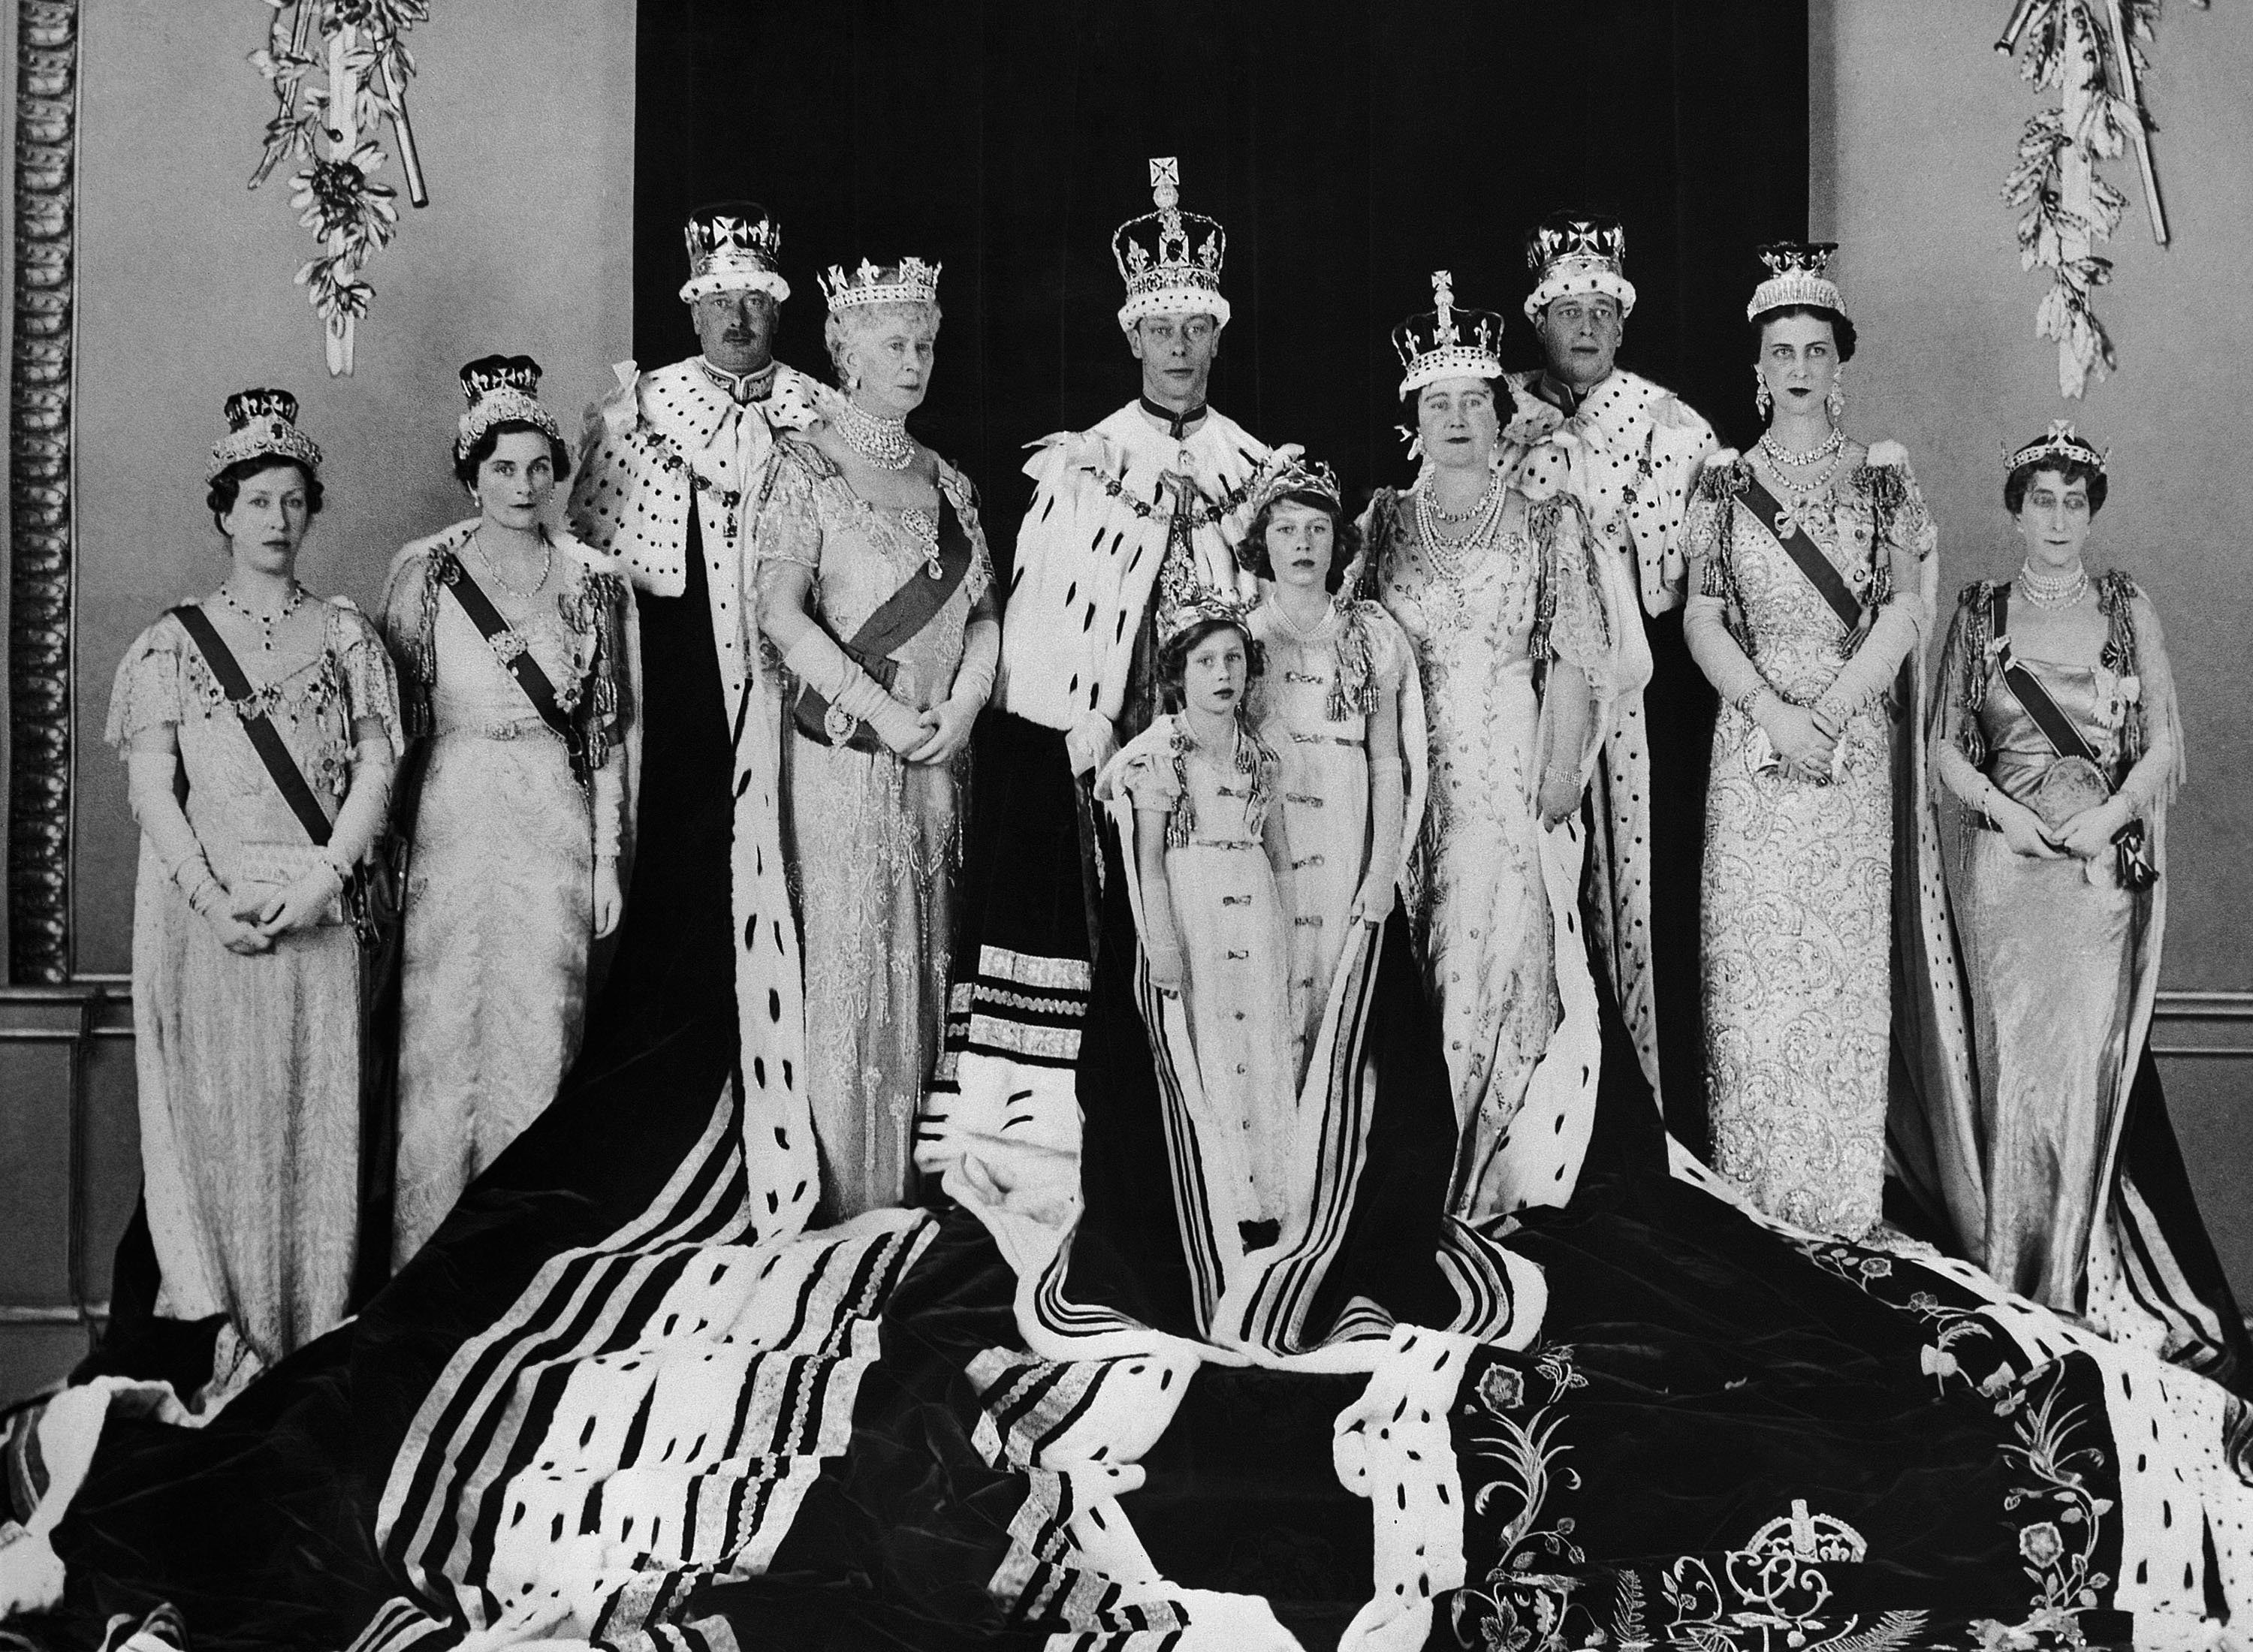 King George VI (C), poses with his wife Queen Elizabeth (C-R), daughters Princess Elizabeth and Margaret, along with members of the family, after his coronation, in London, U.K., May 15, 1937. (AP Photo)